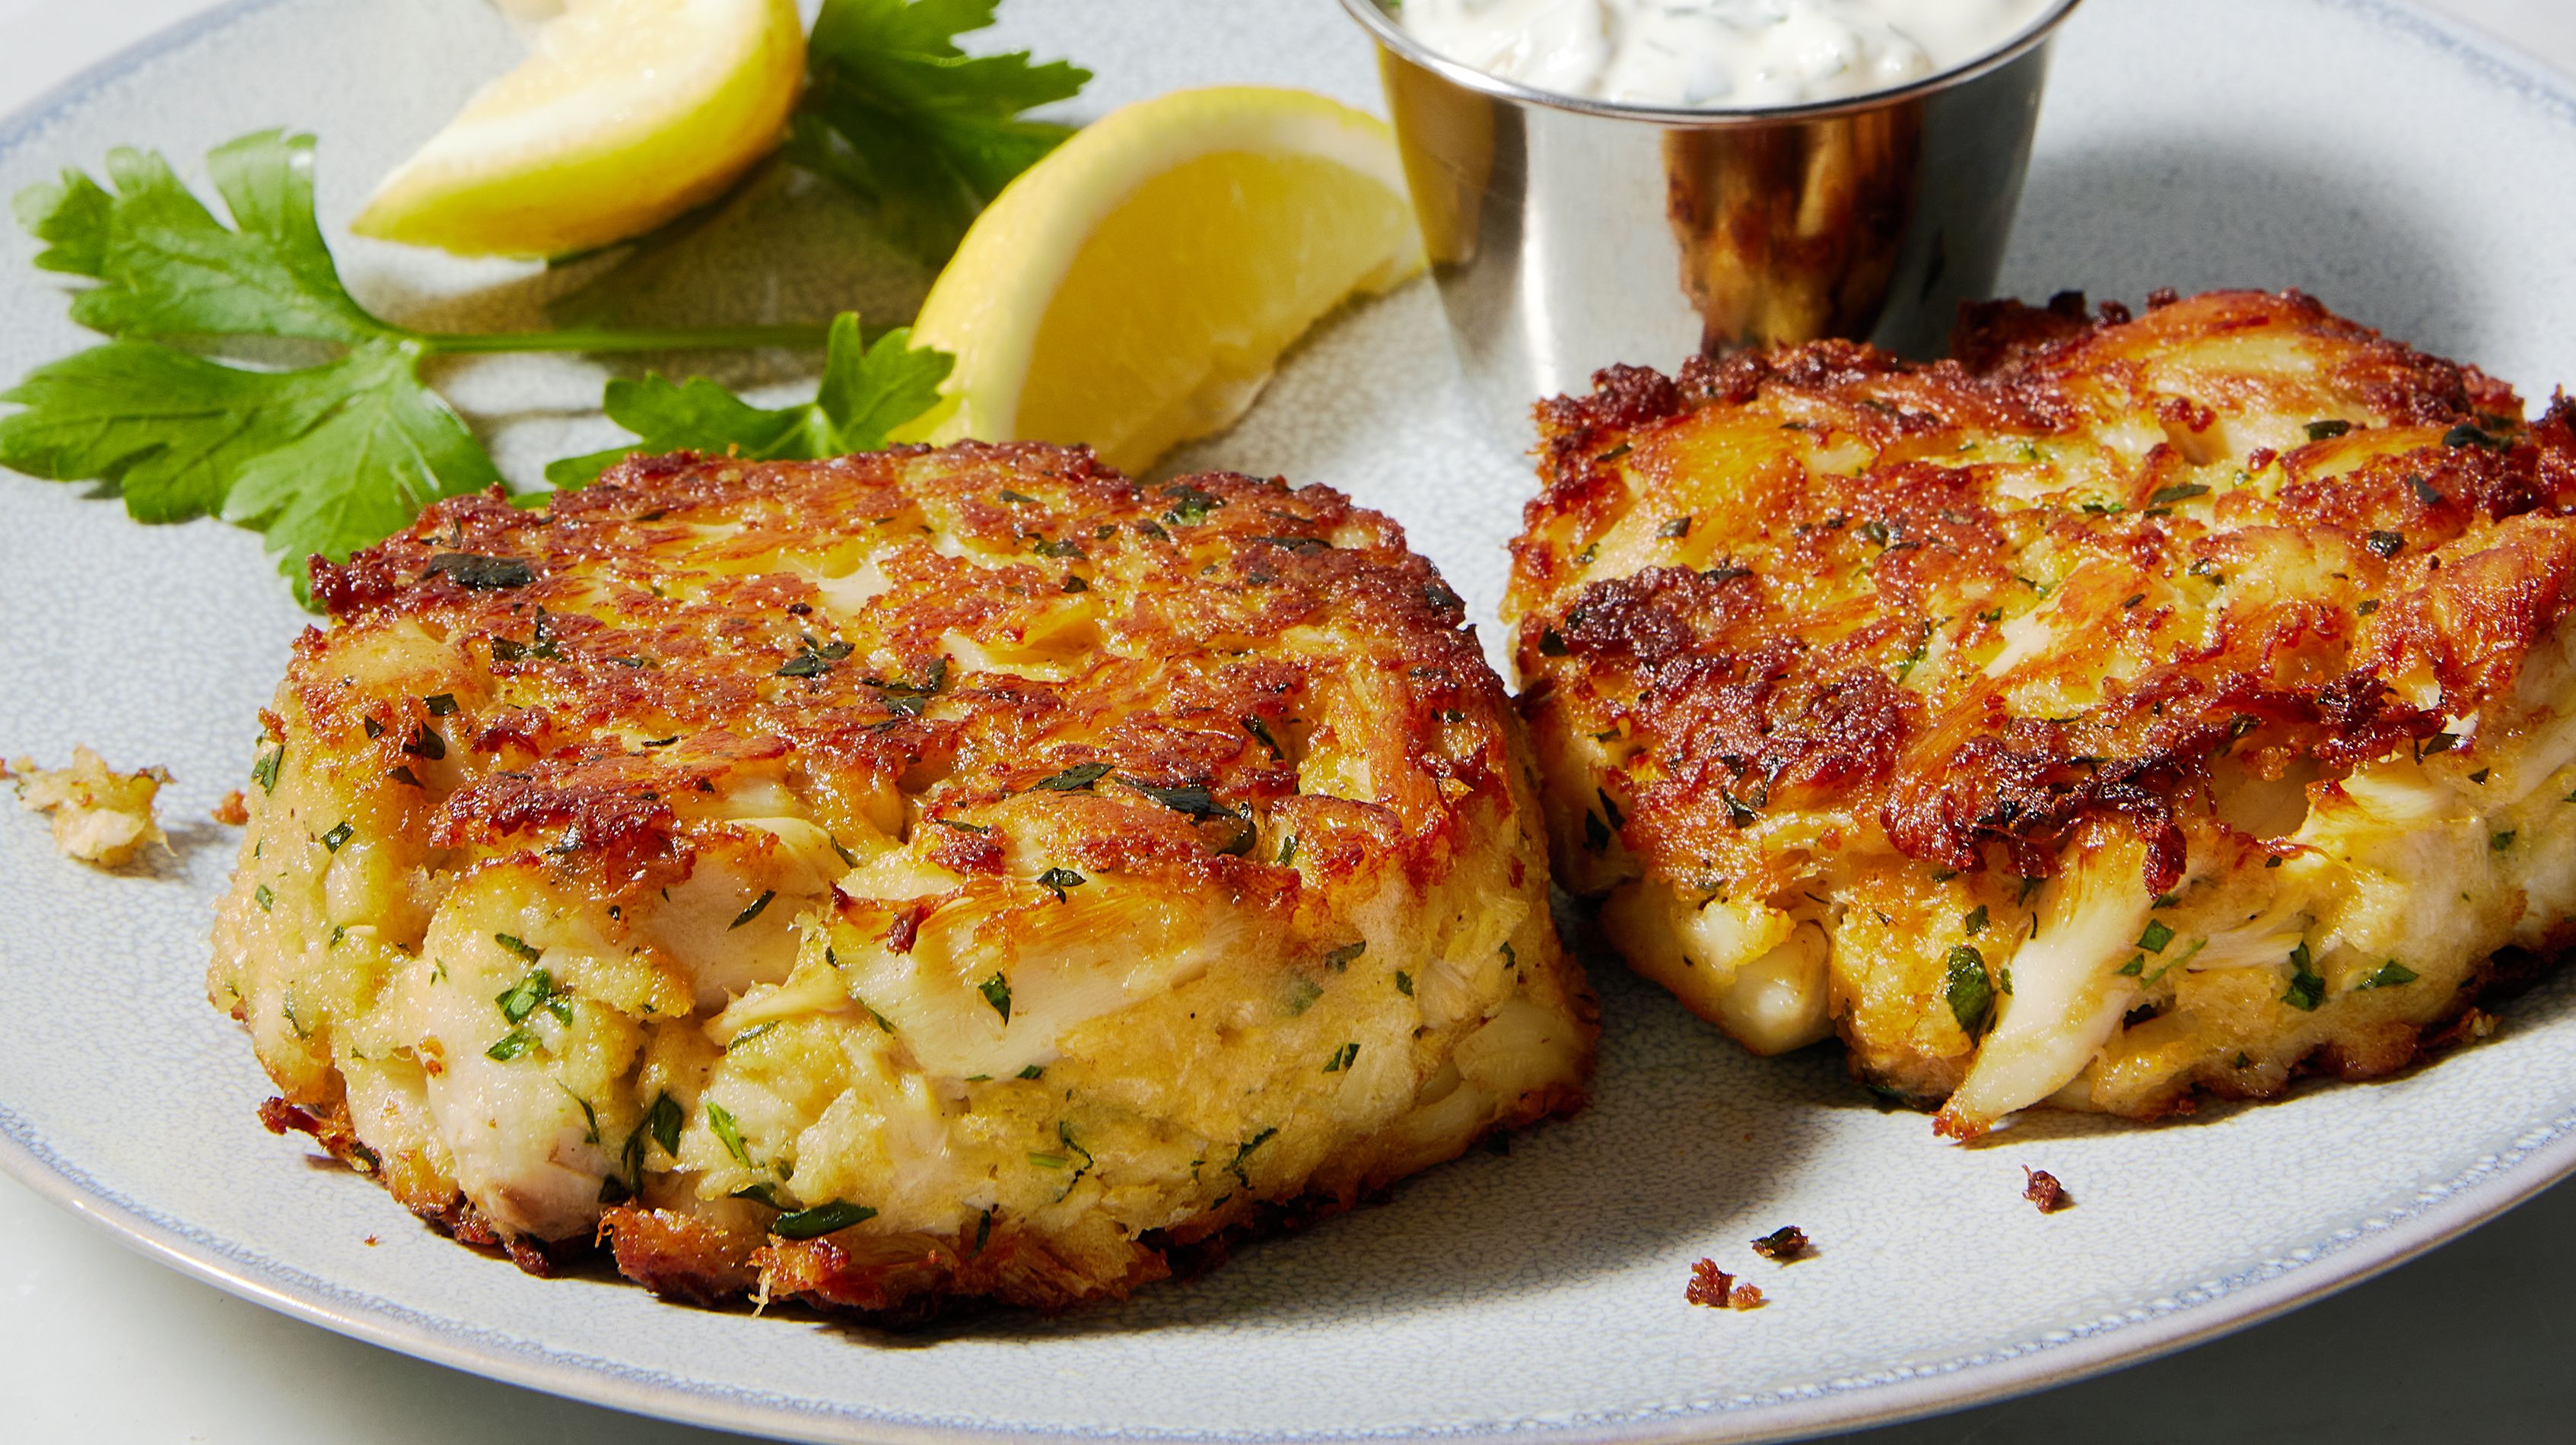 OLD BAY Crab Cake Classic Seasoning Mix 5 lb - Premium Blend of Bread  Crumbs and Herbs to Make Extraordinary Crab Cakes 